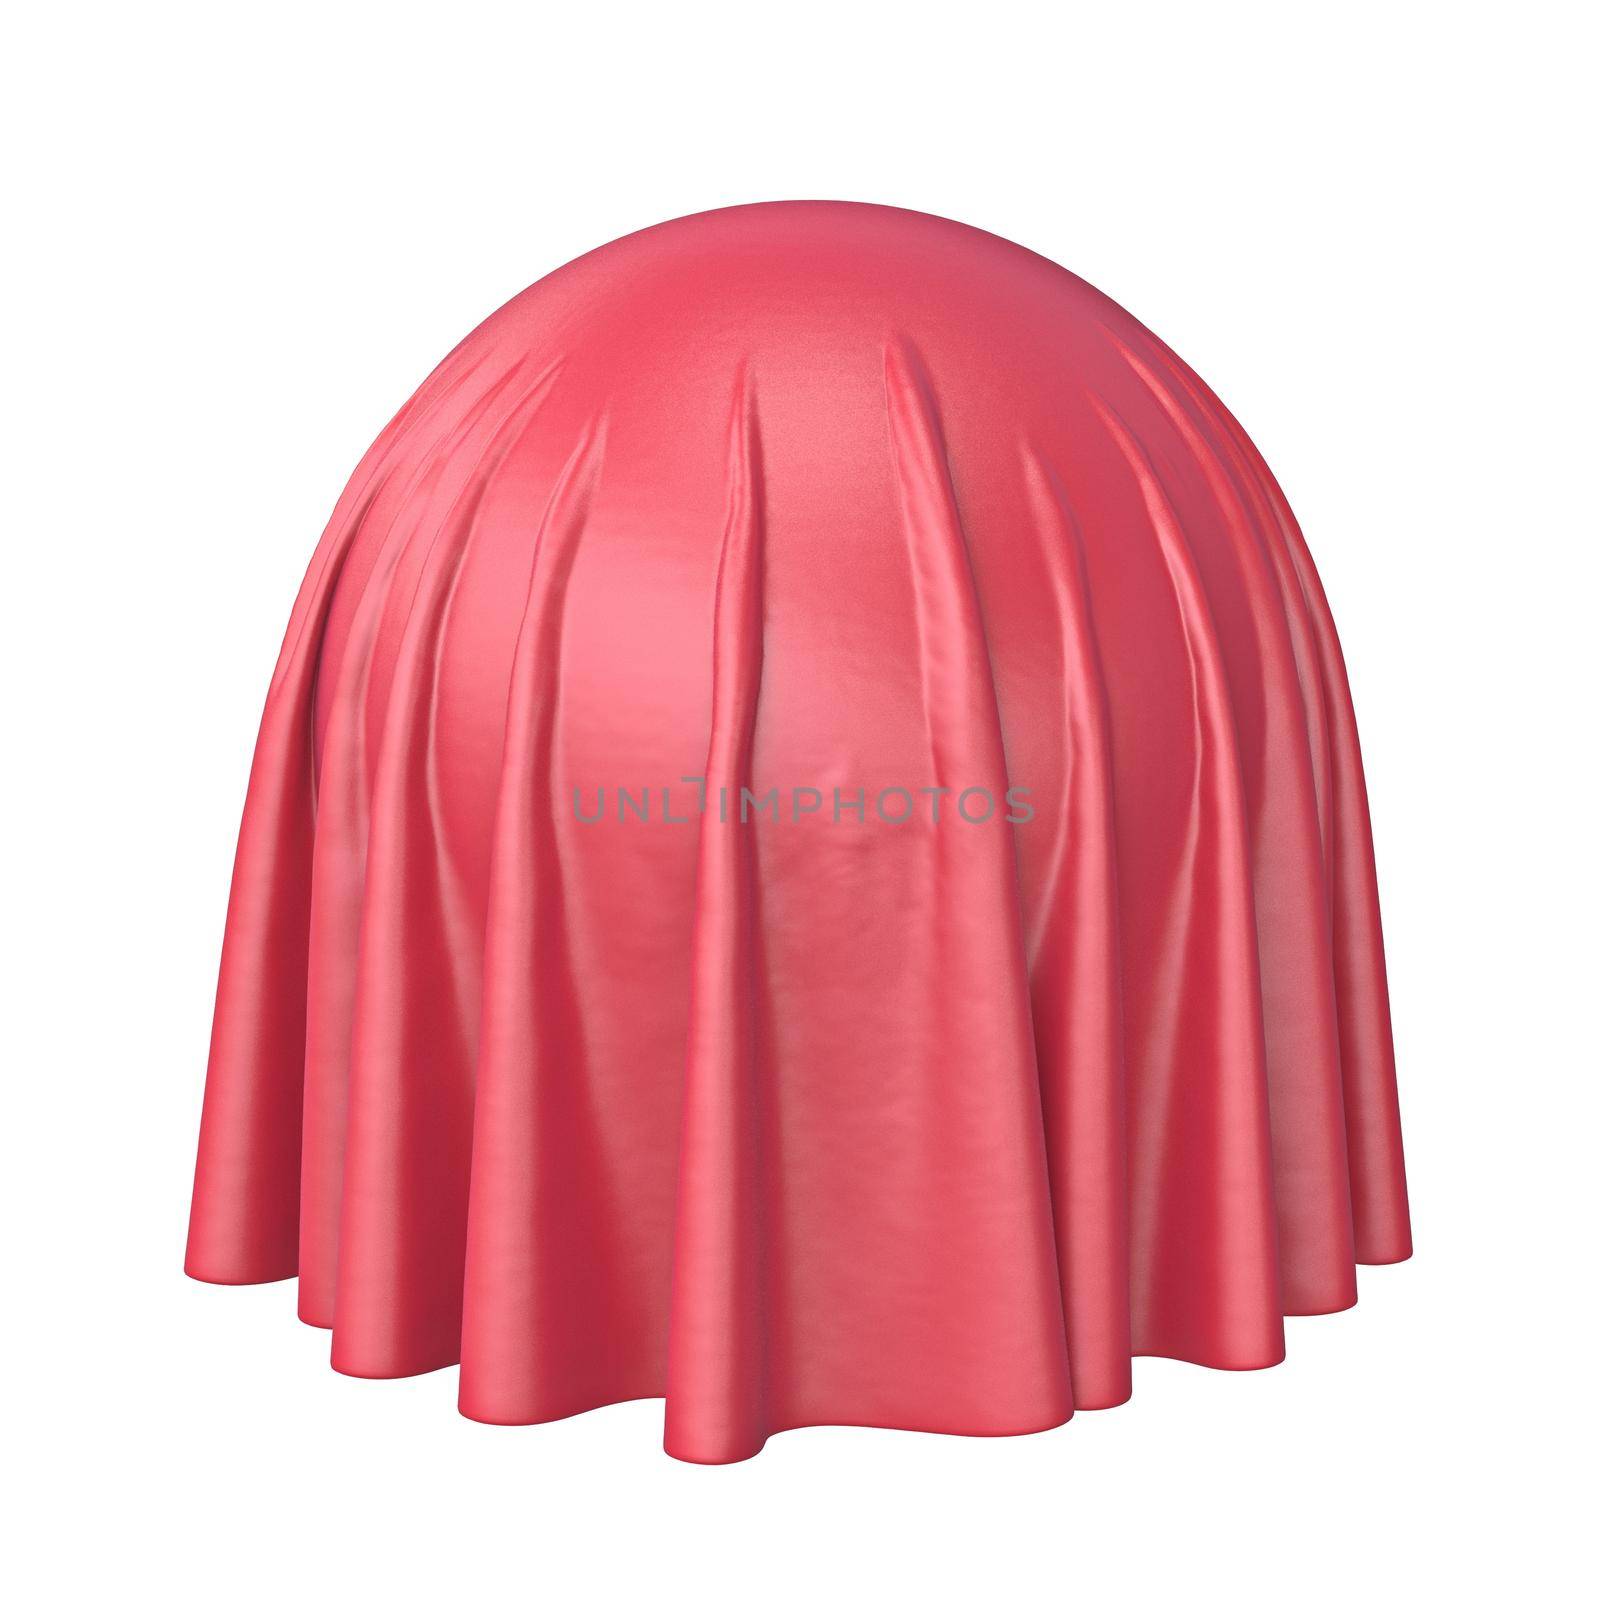 Red silk drapery over sphere 3D rendering illustration isolated on white background